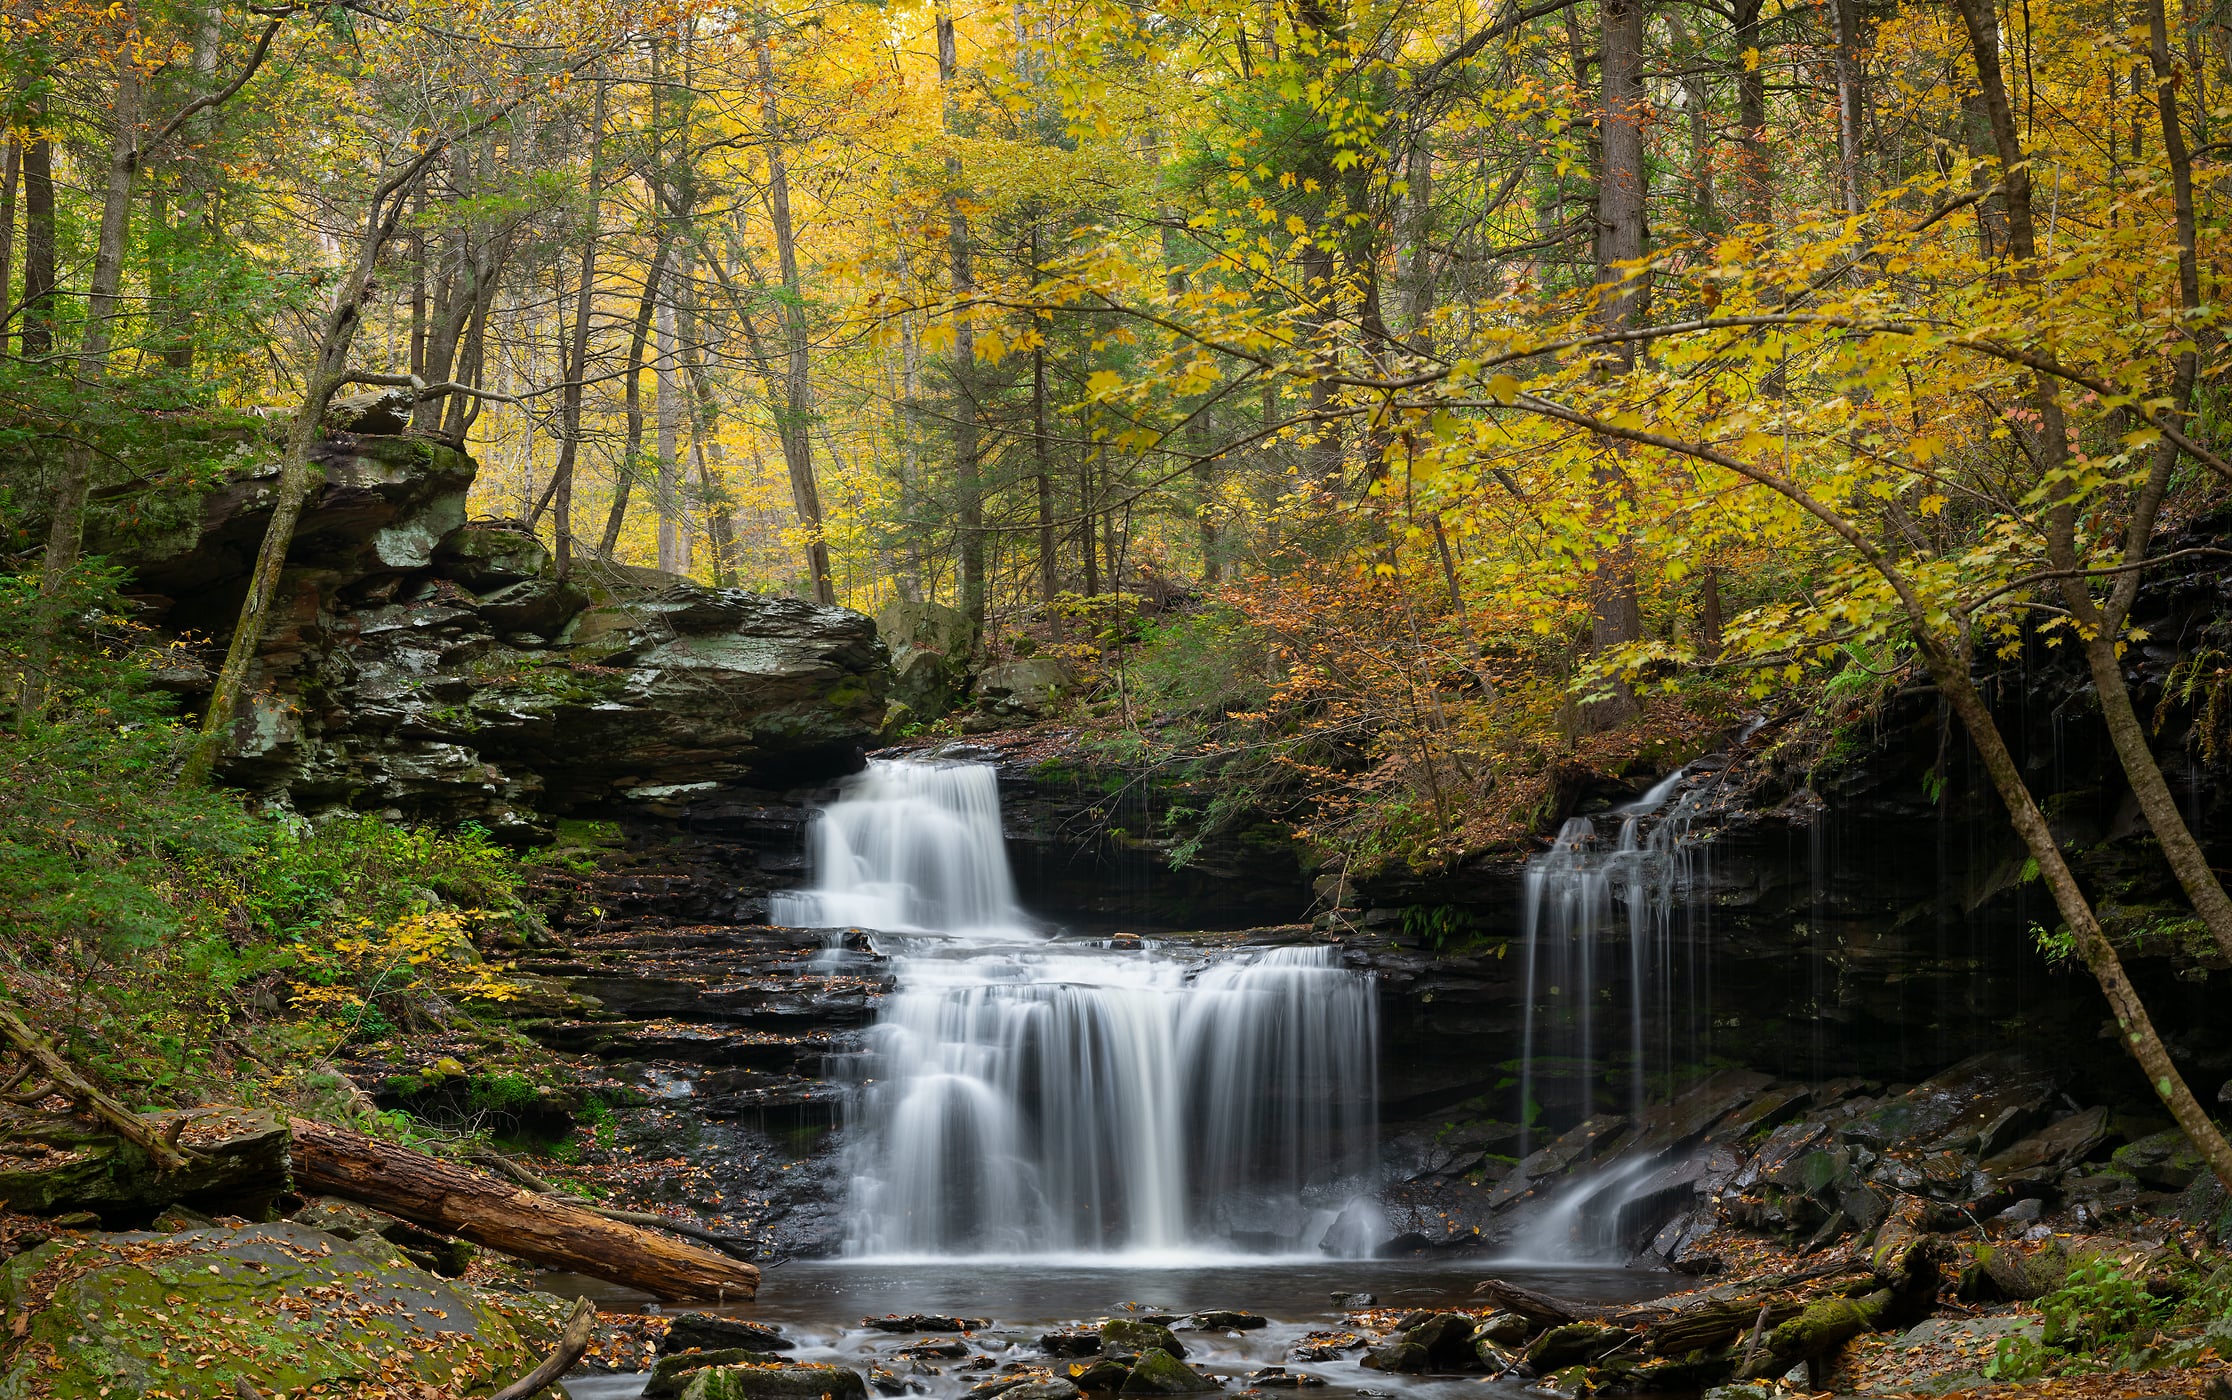 479 megapixels! A very high resolution, large-format VAST photo print of a waterfall in the woods of the Appalachian Mountains in autumn; nature photograph created by Greg Probst at Ricketts Falls in Ricketts Glen State Park, Pennsylvania.